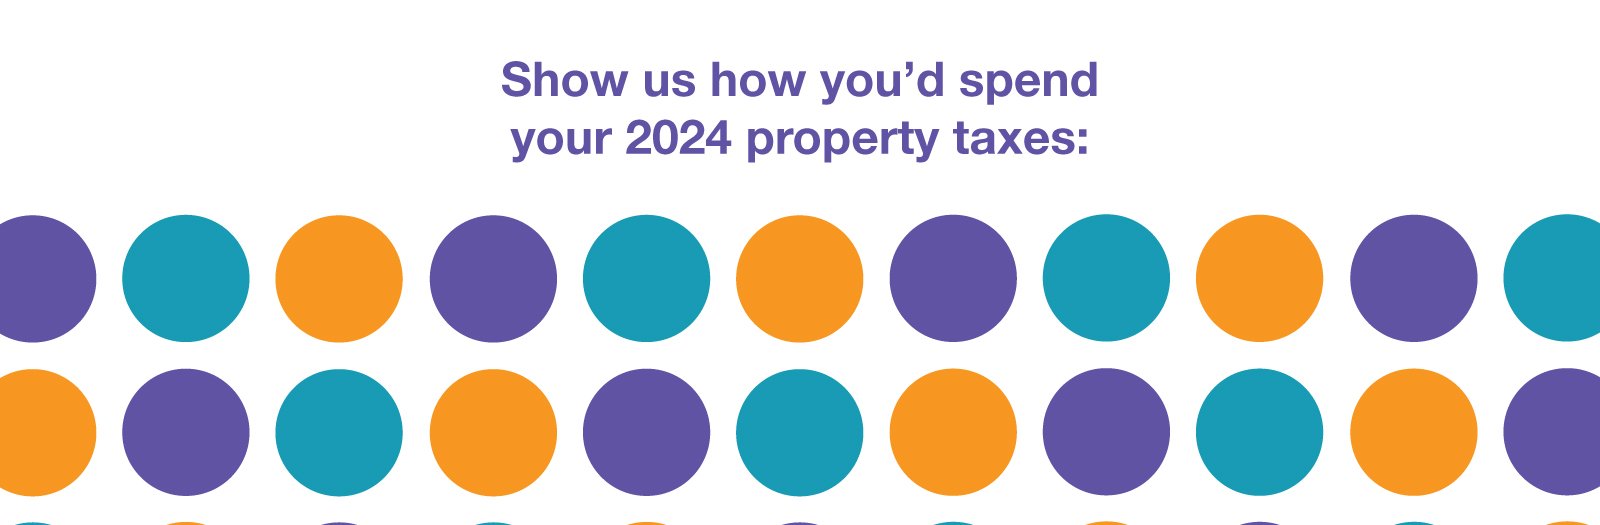 "Show us how you'd spend your 2024 property taxes:" in purple writing above purple, teal and orange dots.